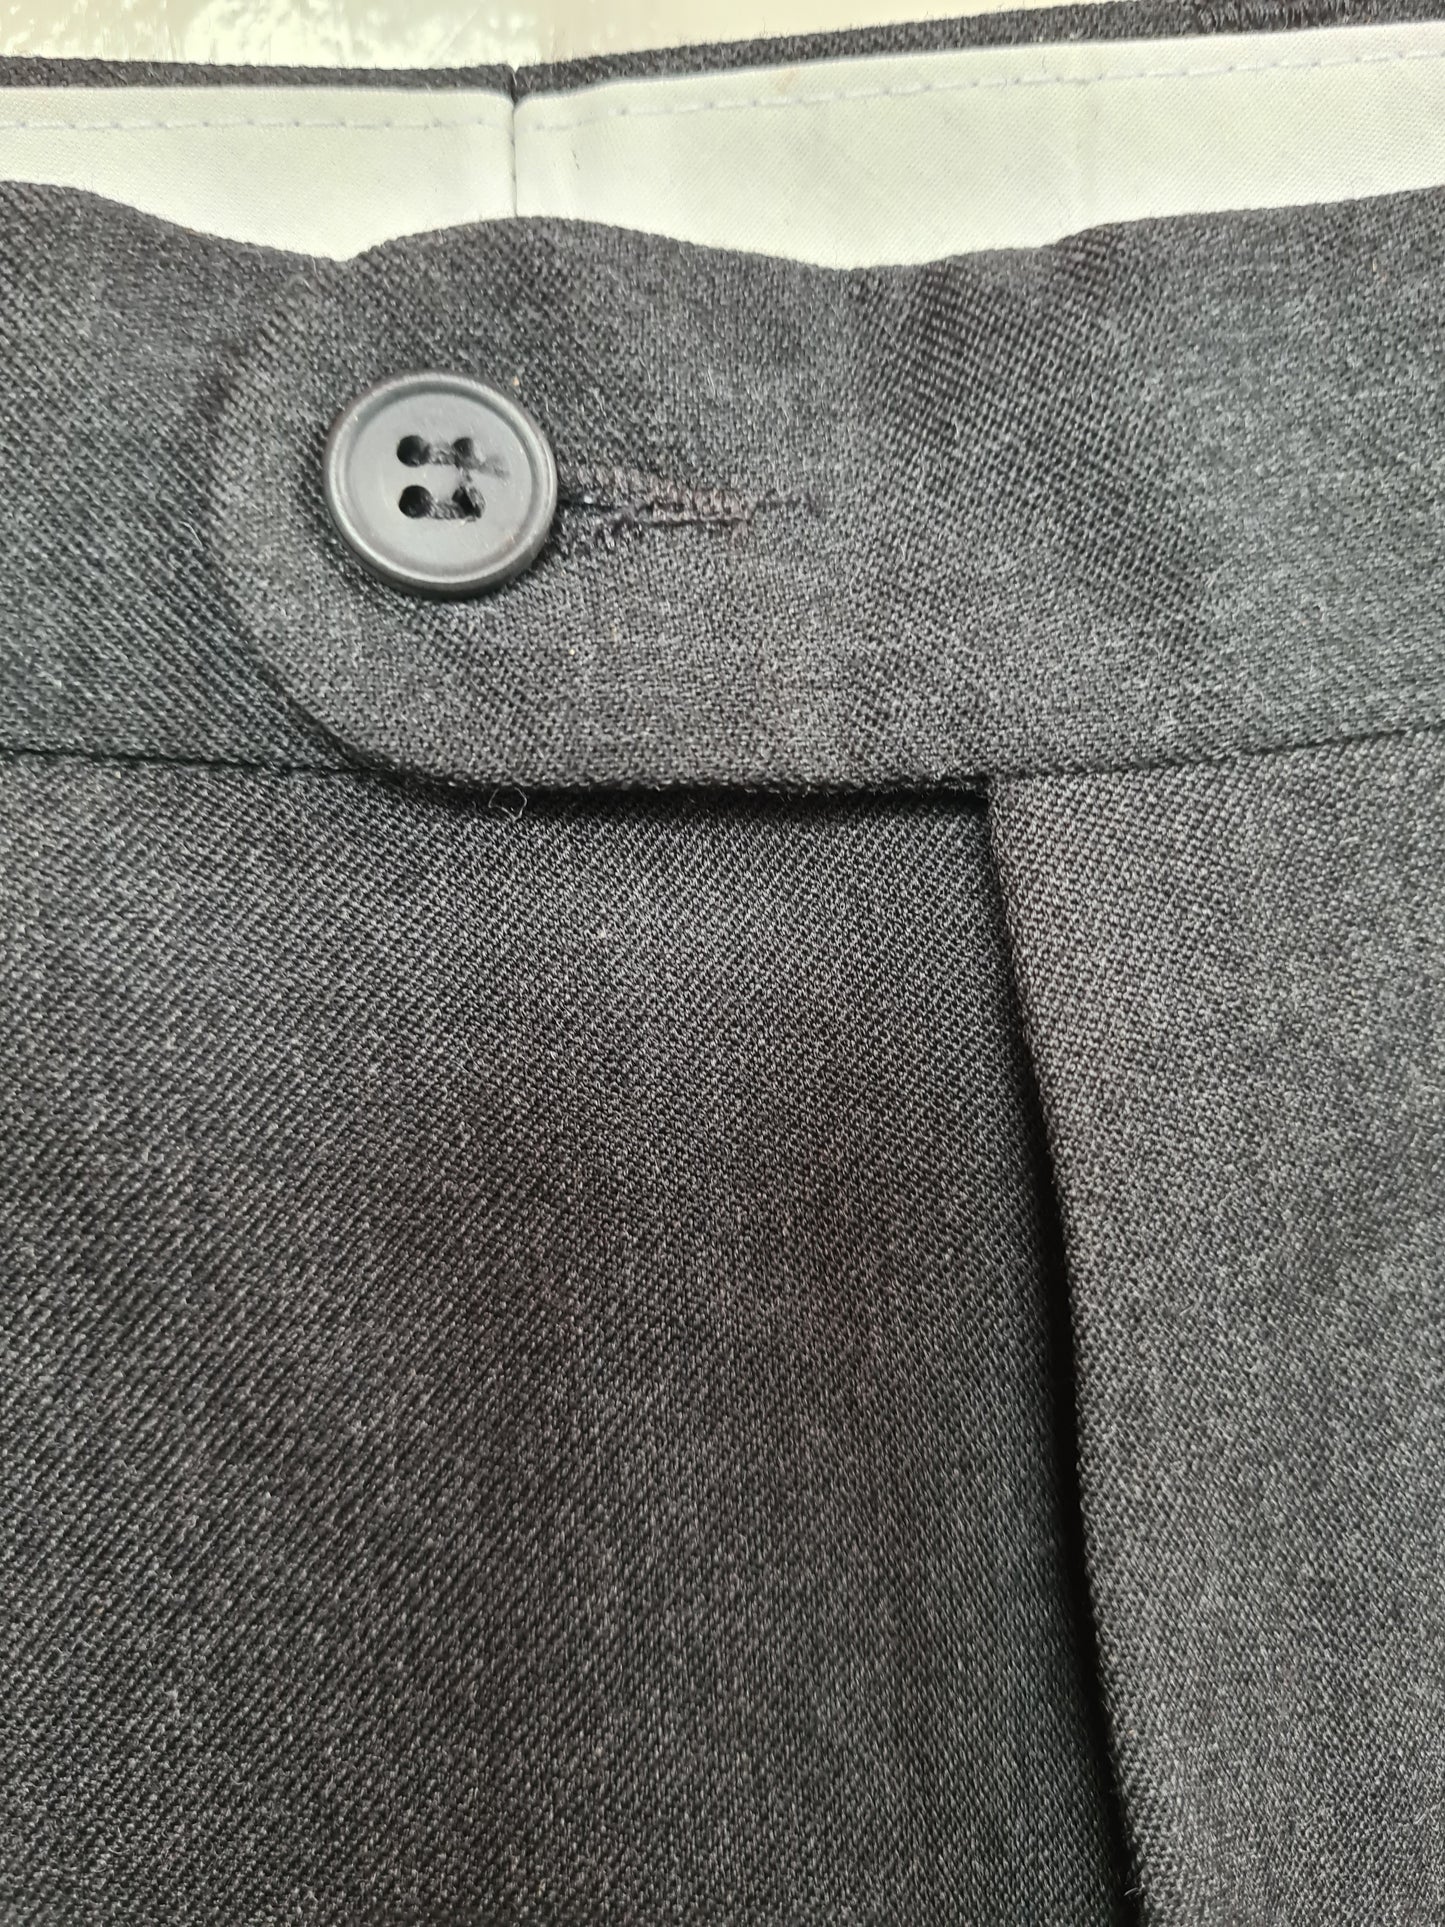 Mens grey in hand trousers size 34 FREE POSTAGE ✅️